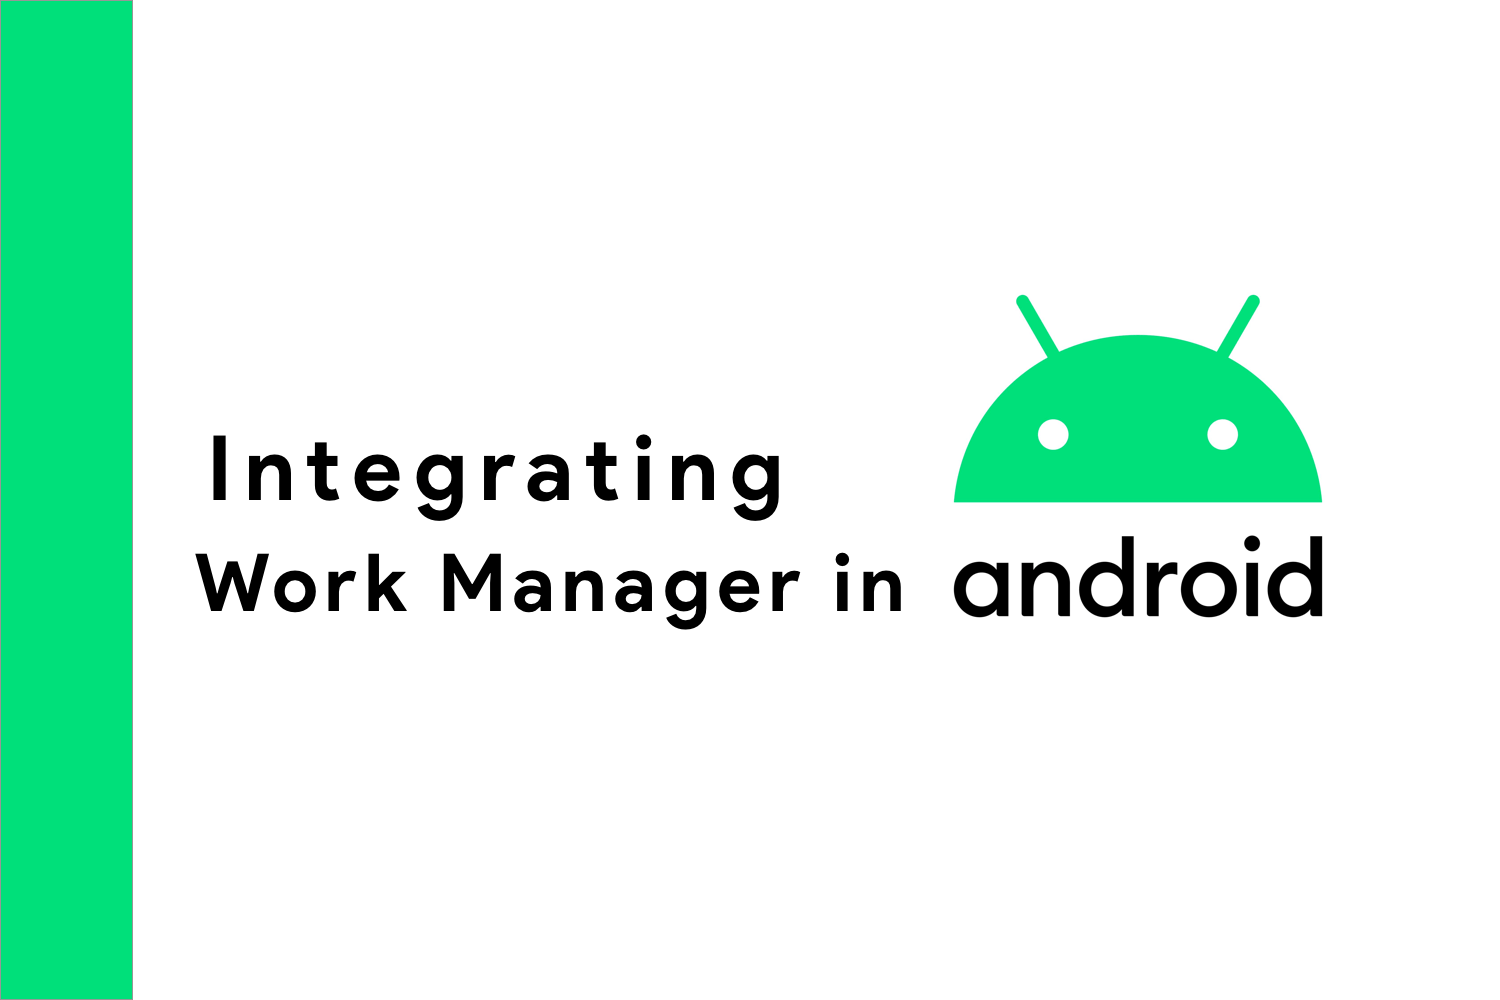 Integrating Work Manager - Android Tutorial